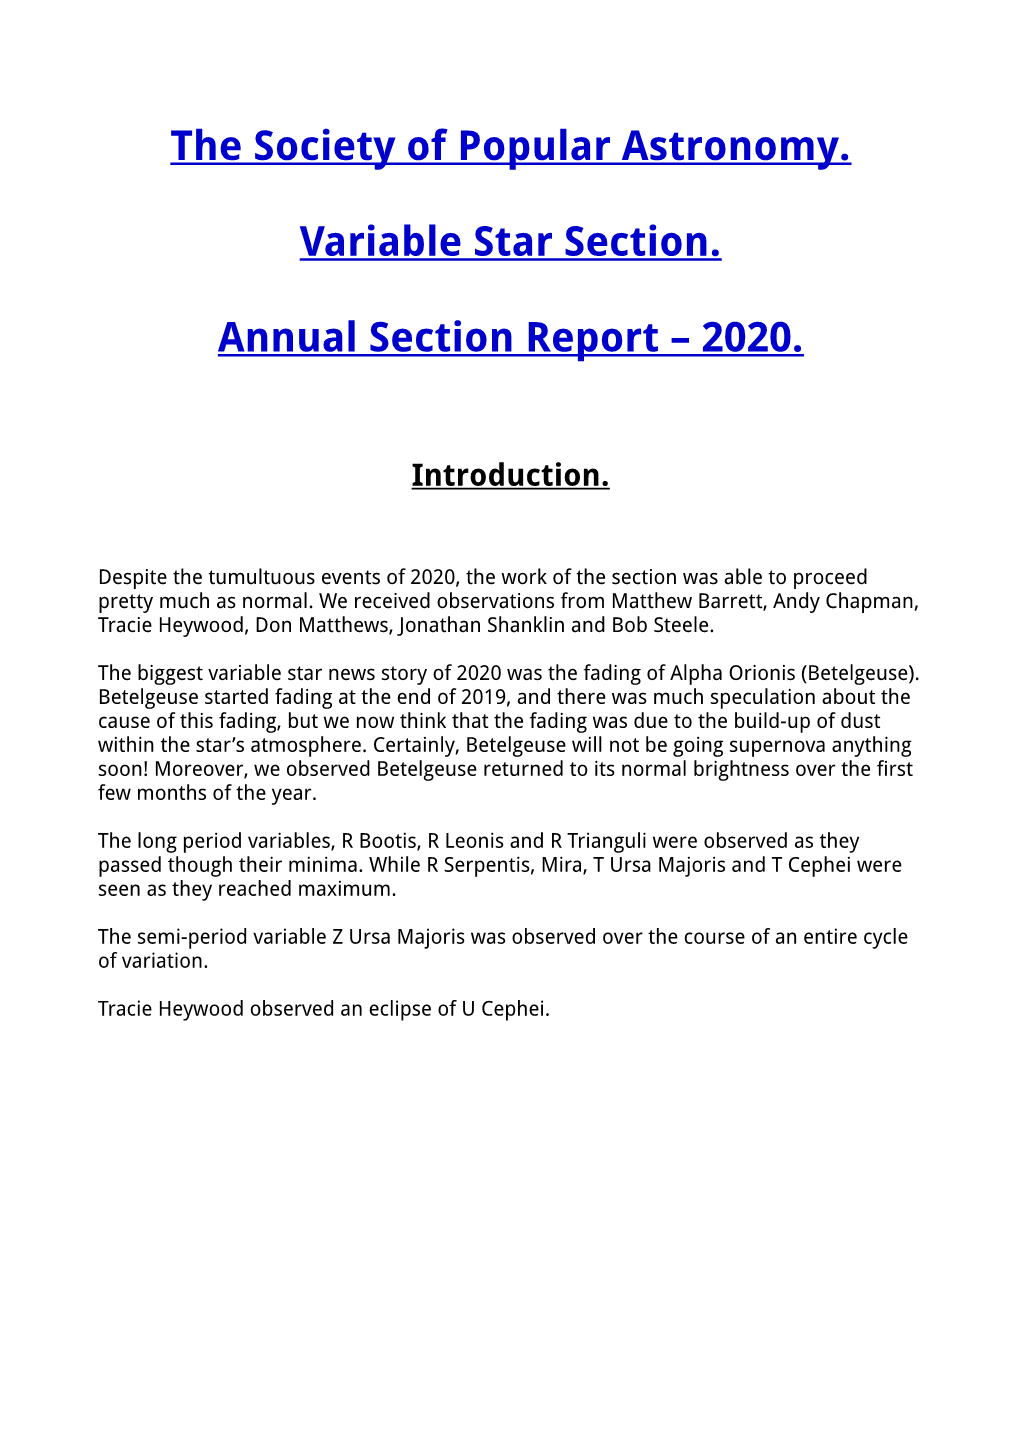 The Society of Popular Astronomy. Variable Star Section. Annual